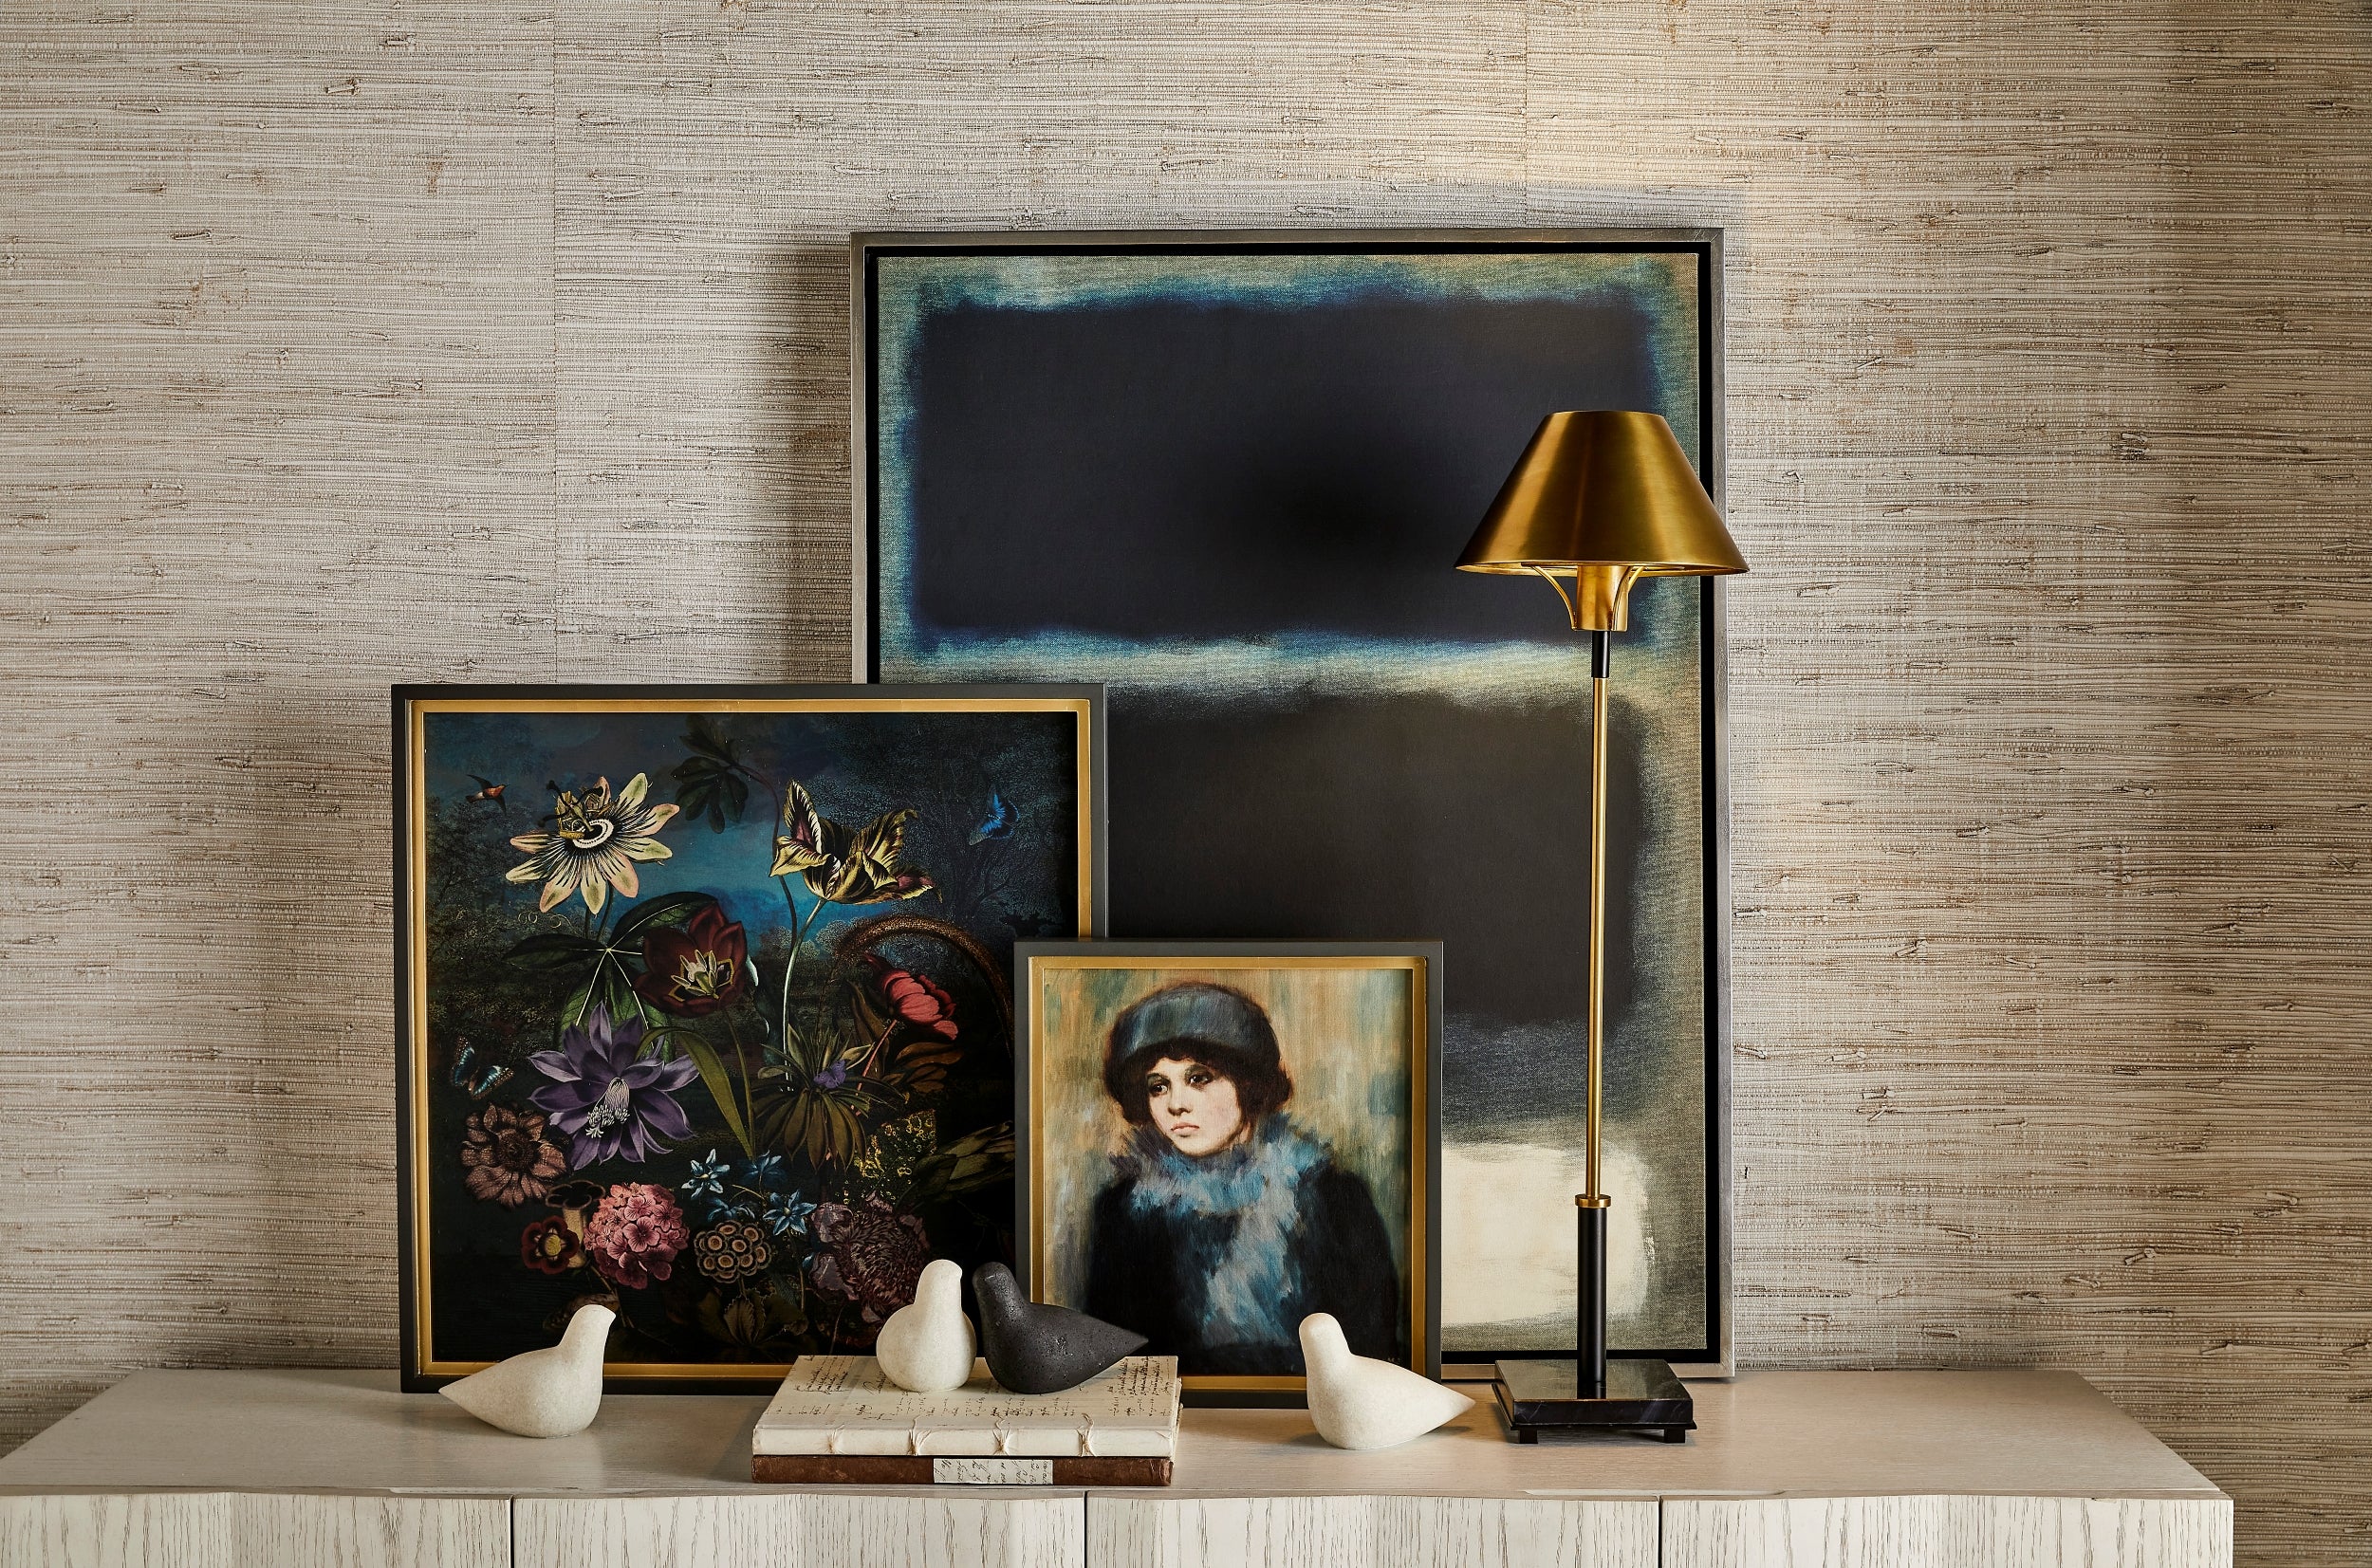 Artwork leaning against a wall atop a credenza cabinet with carved stone bird decor, some books, and a lamp.